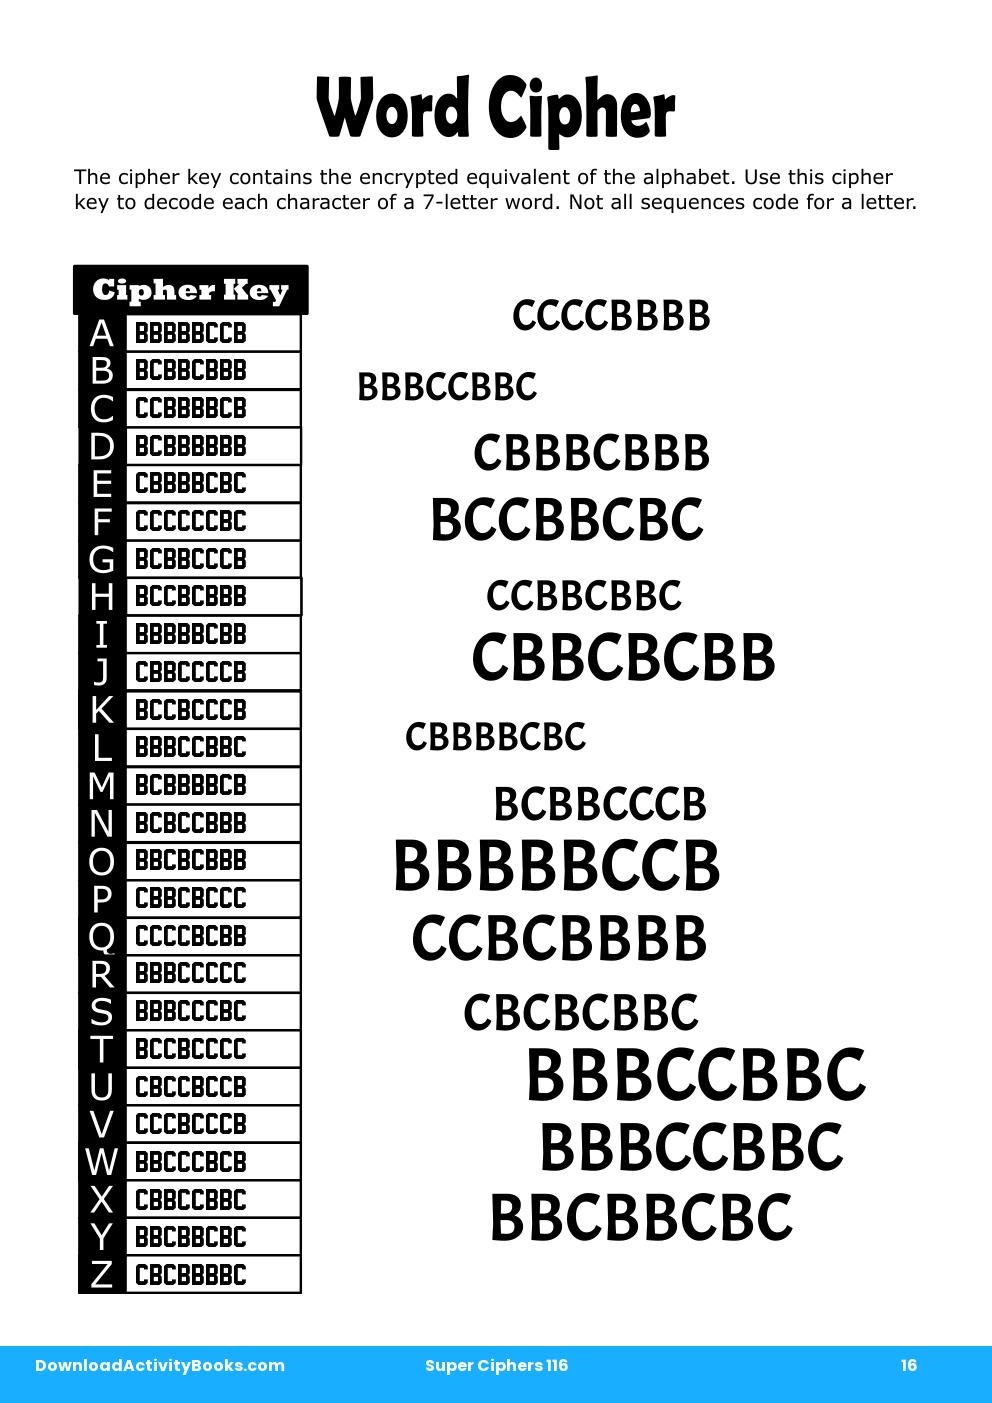 Word Cipher in Super Ciphers 116